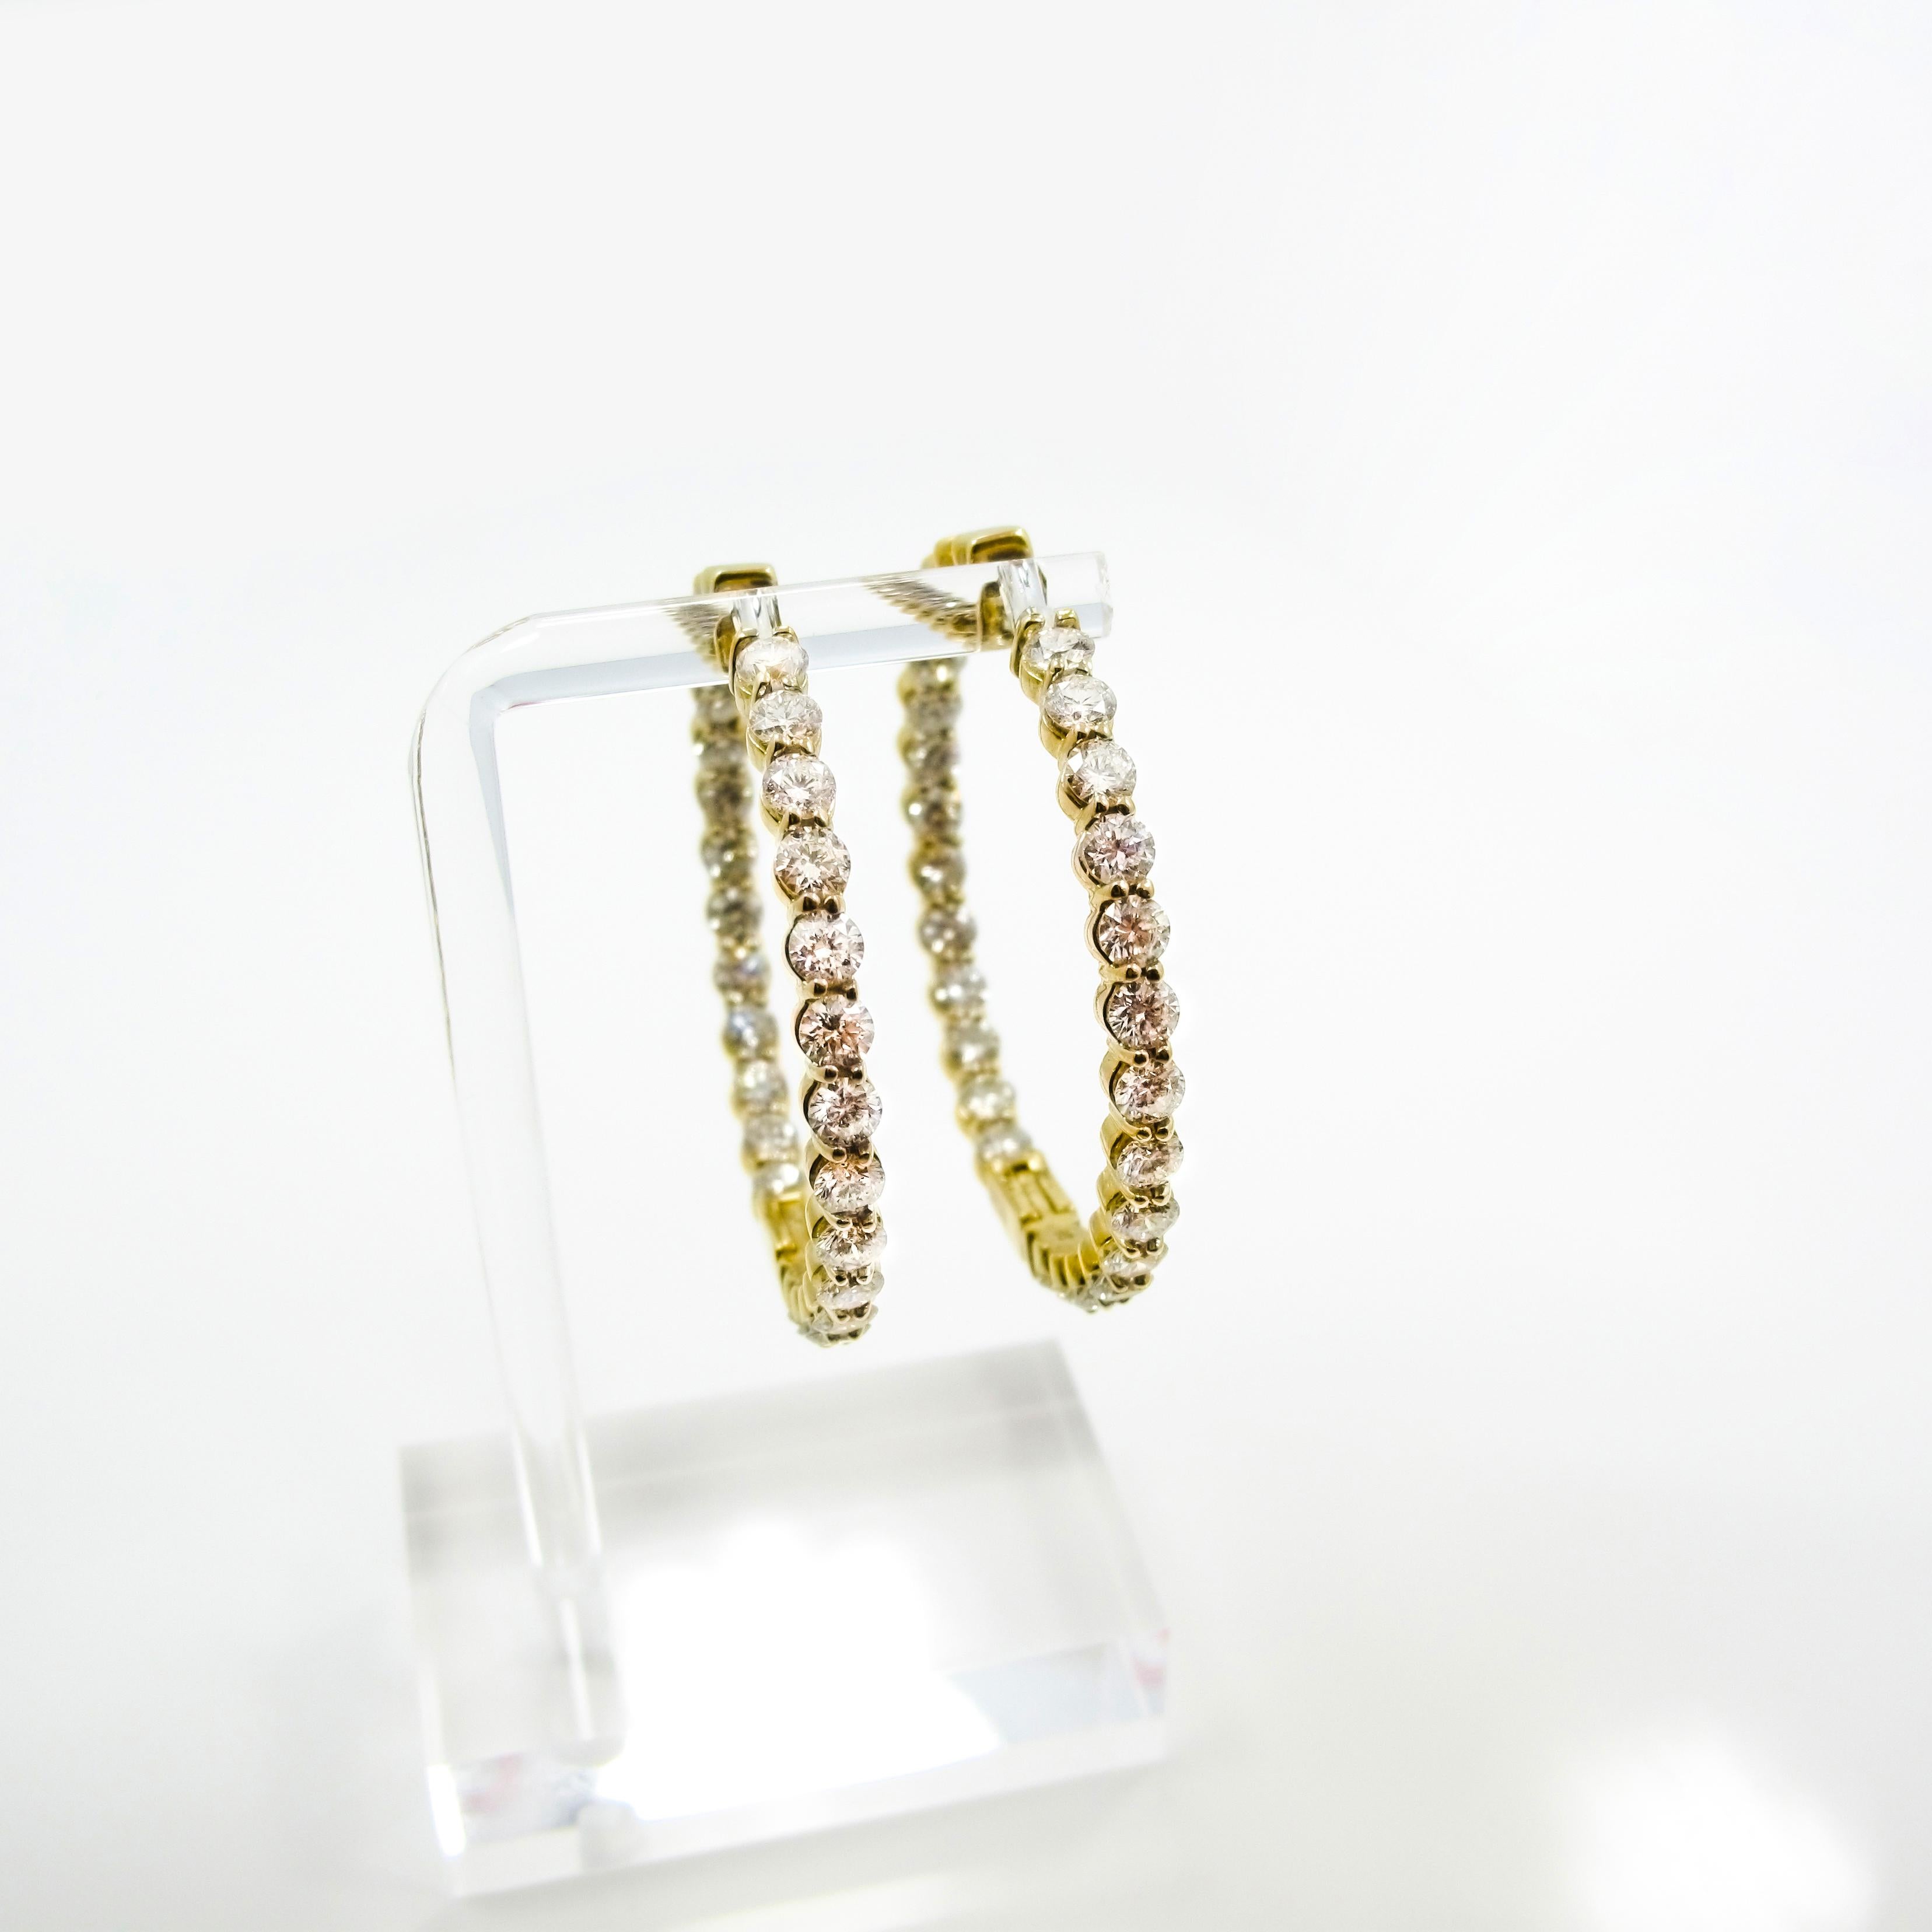 Make a statement with these! One pair of inside-outside diamond hoops set in 14k yellow gold. The pair contain 52 round brilliant diamonds in prong set baskets weighing approximately 10.40cttw, 3.7mm each, G-H in color, SI1-2 in clarity. The hoops